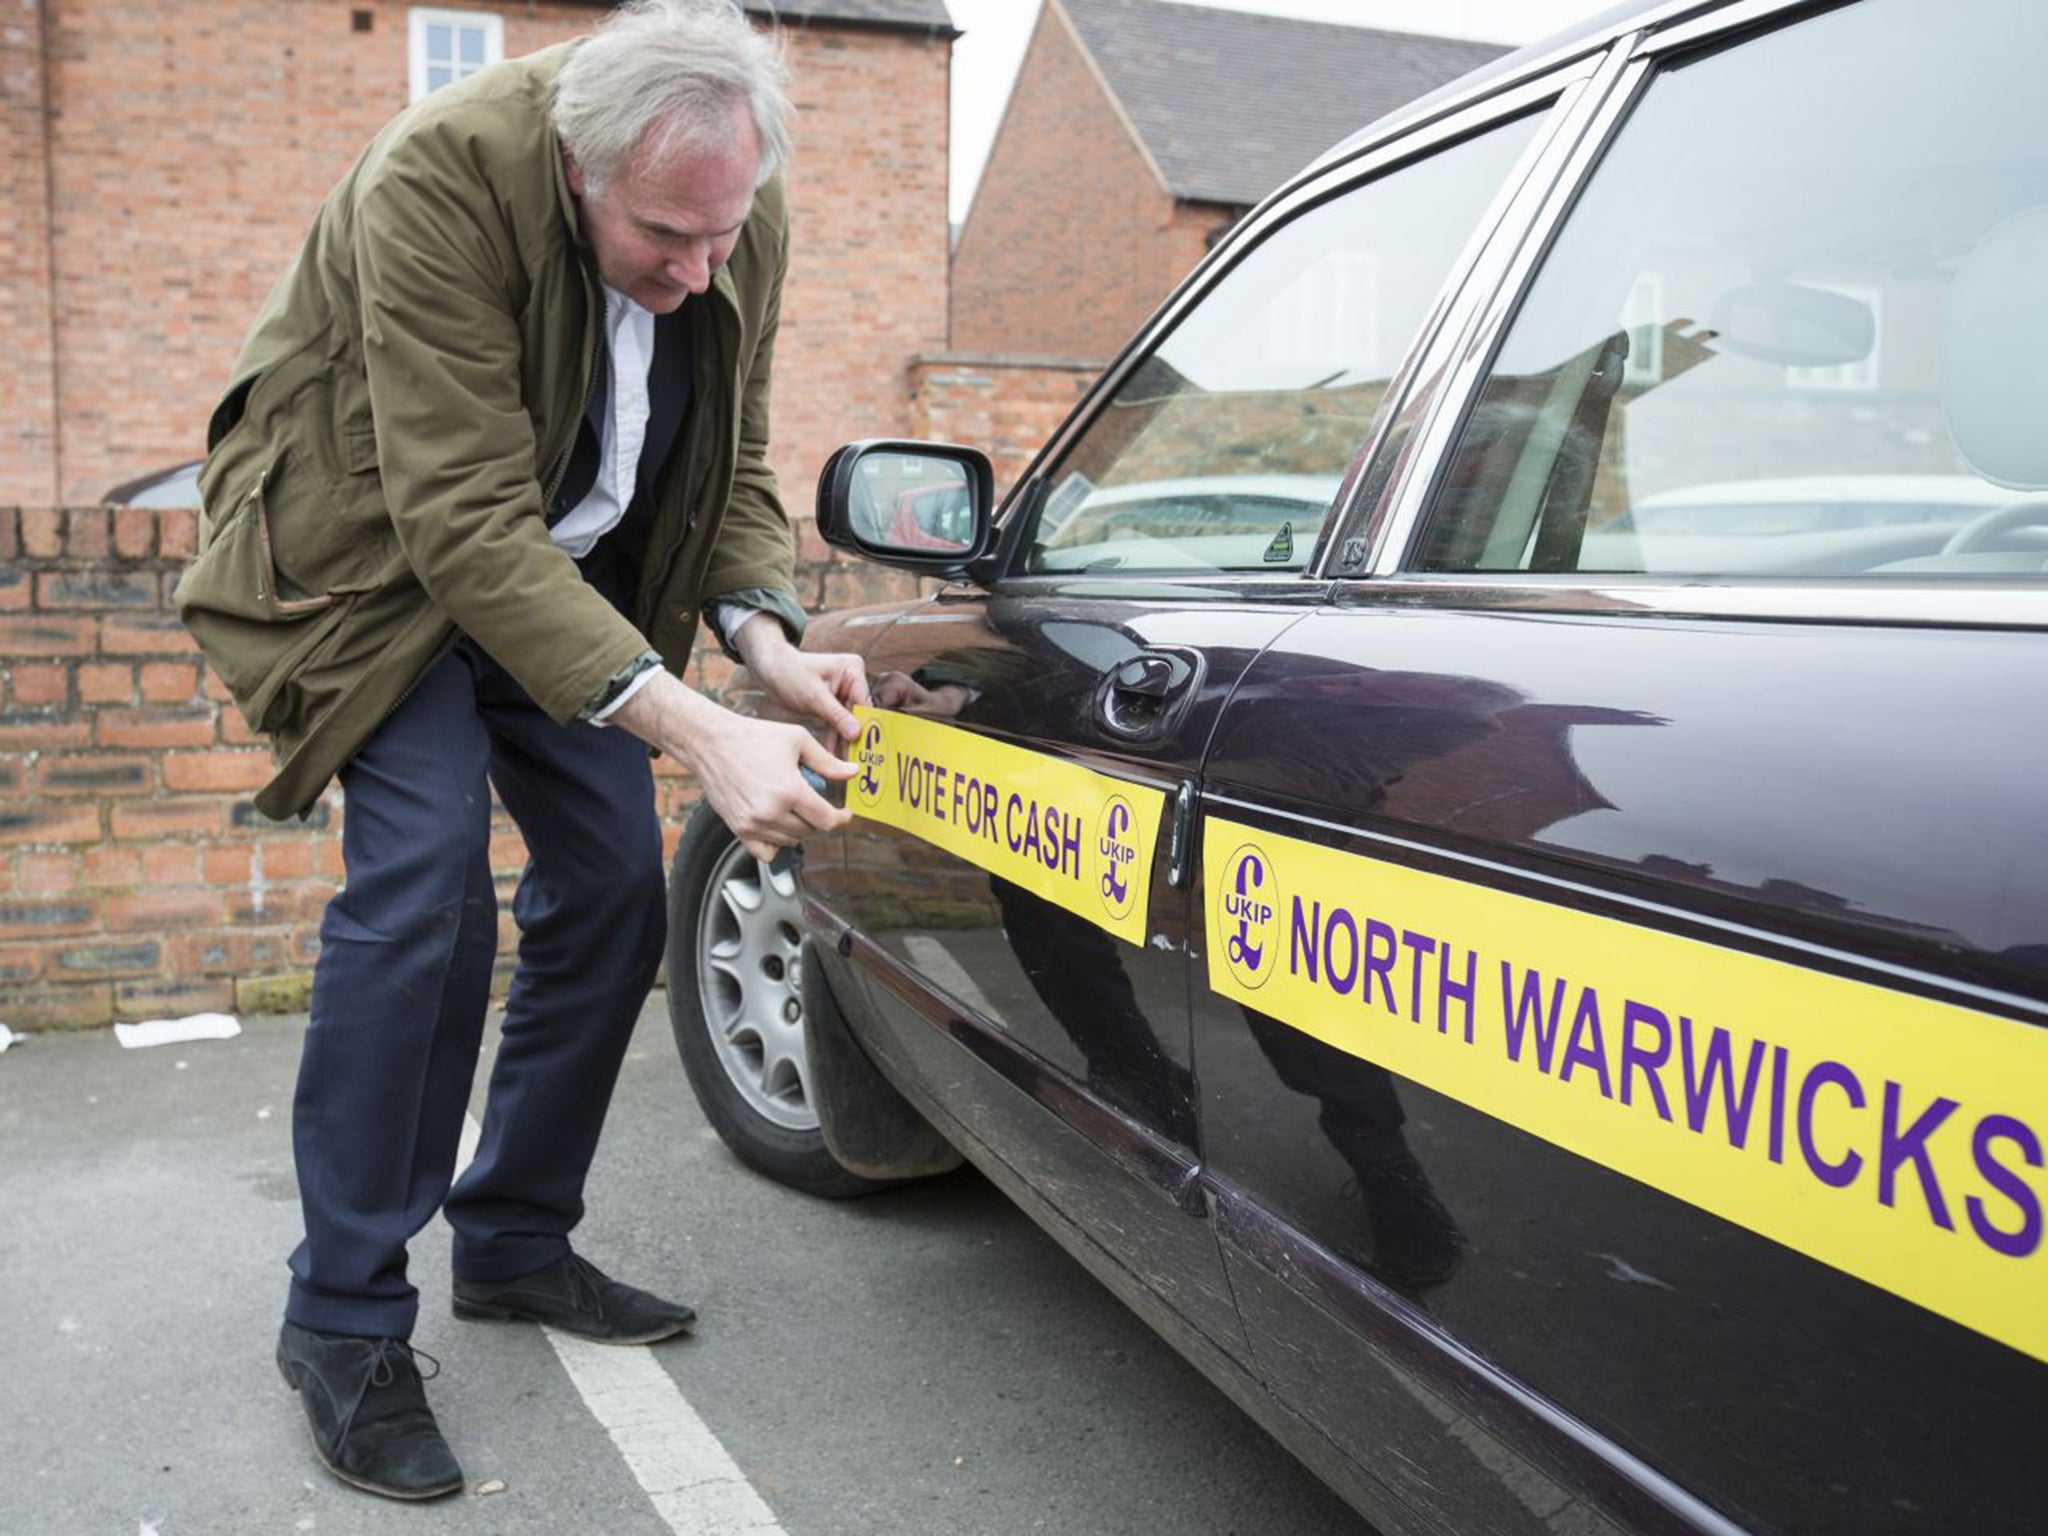 On the money? William Cash, the Ukip candidate for Warwickshire North, decorates his Jaguar before campaigning in Atherstone